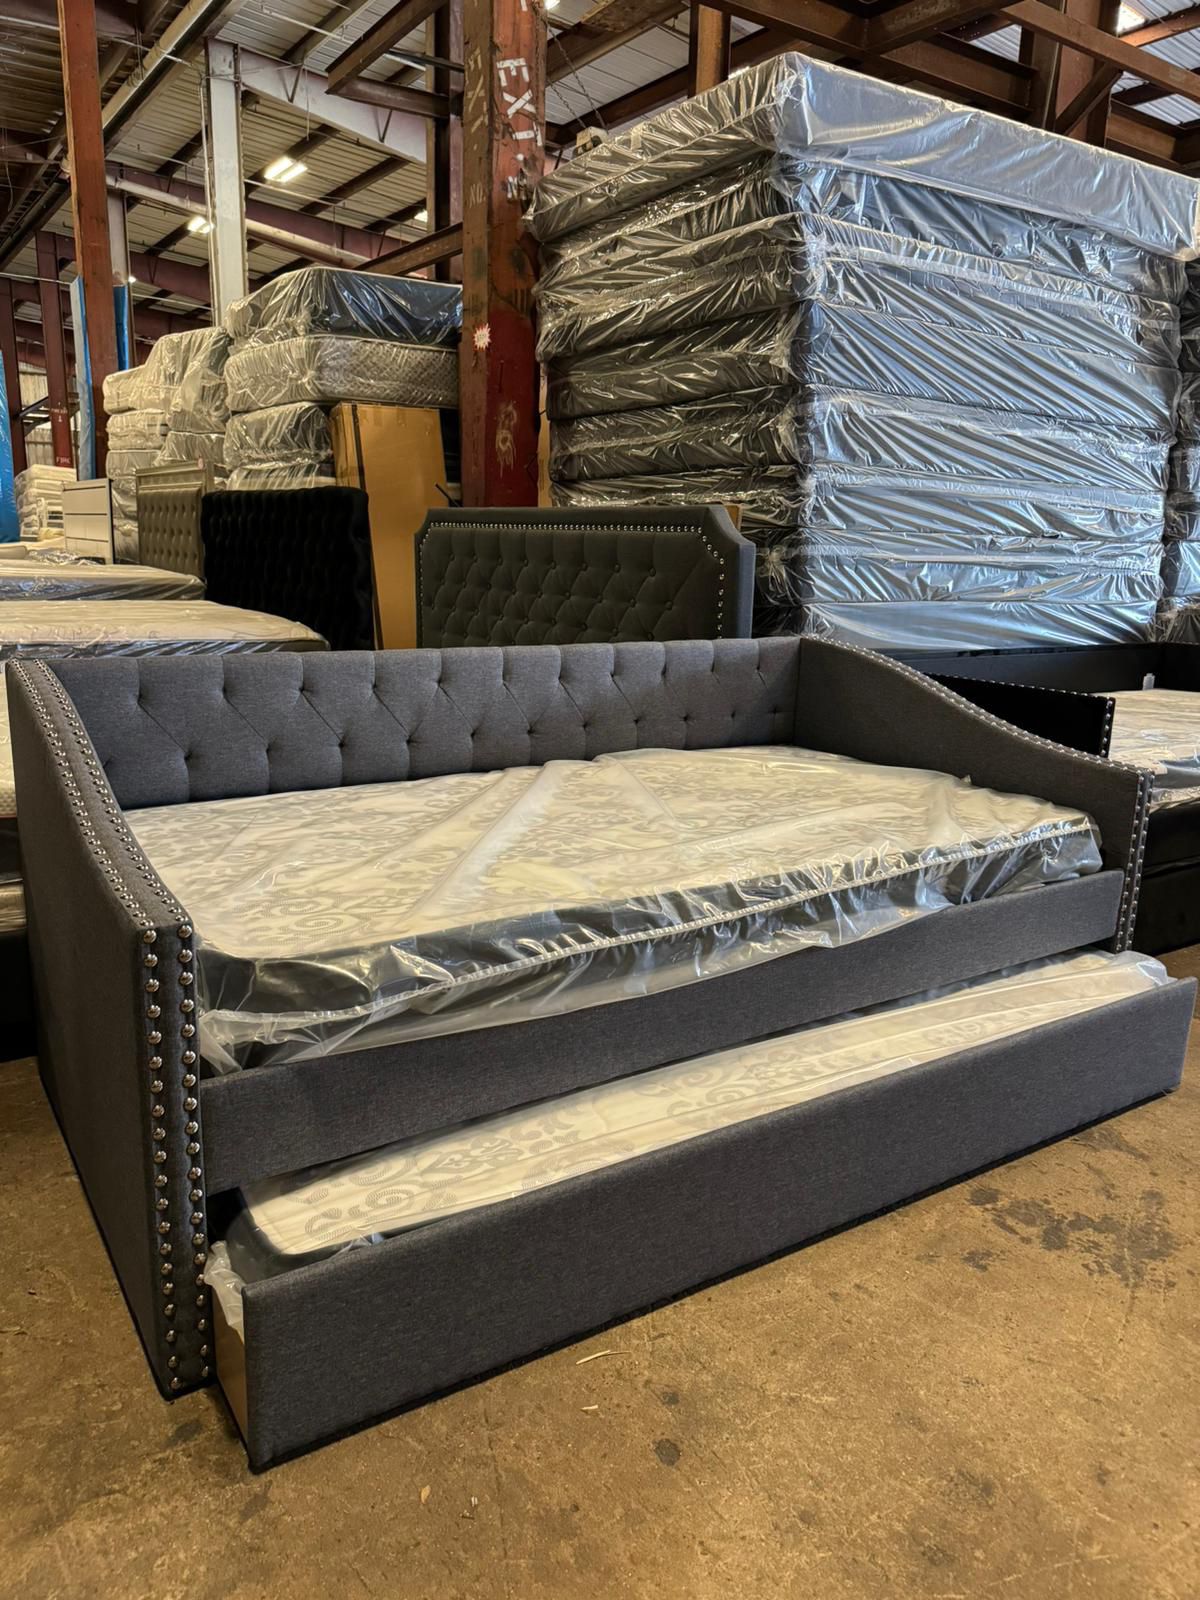 New Daybed Gray Color $339. Add Mattresses $537. Delivery & Assemble Available 